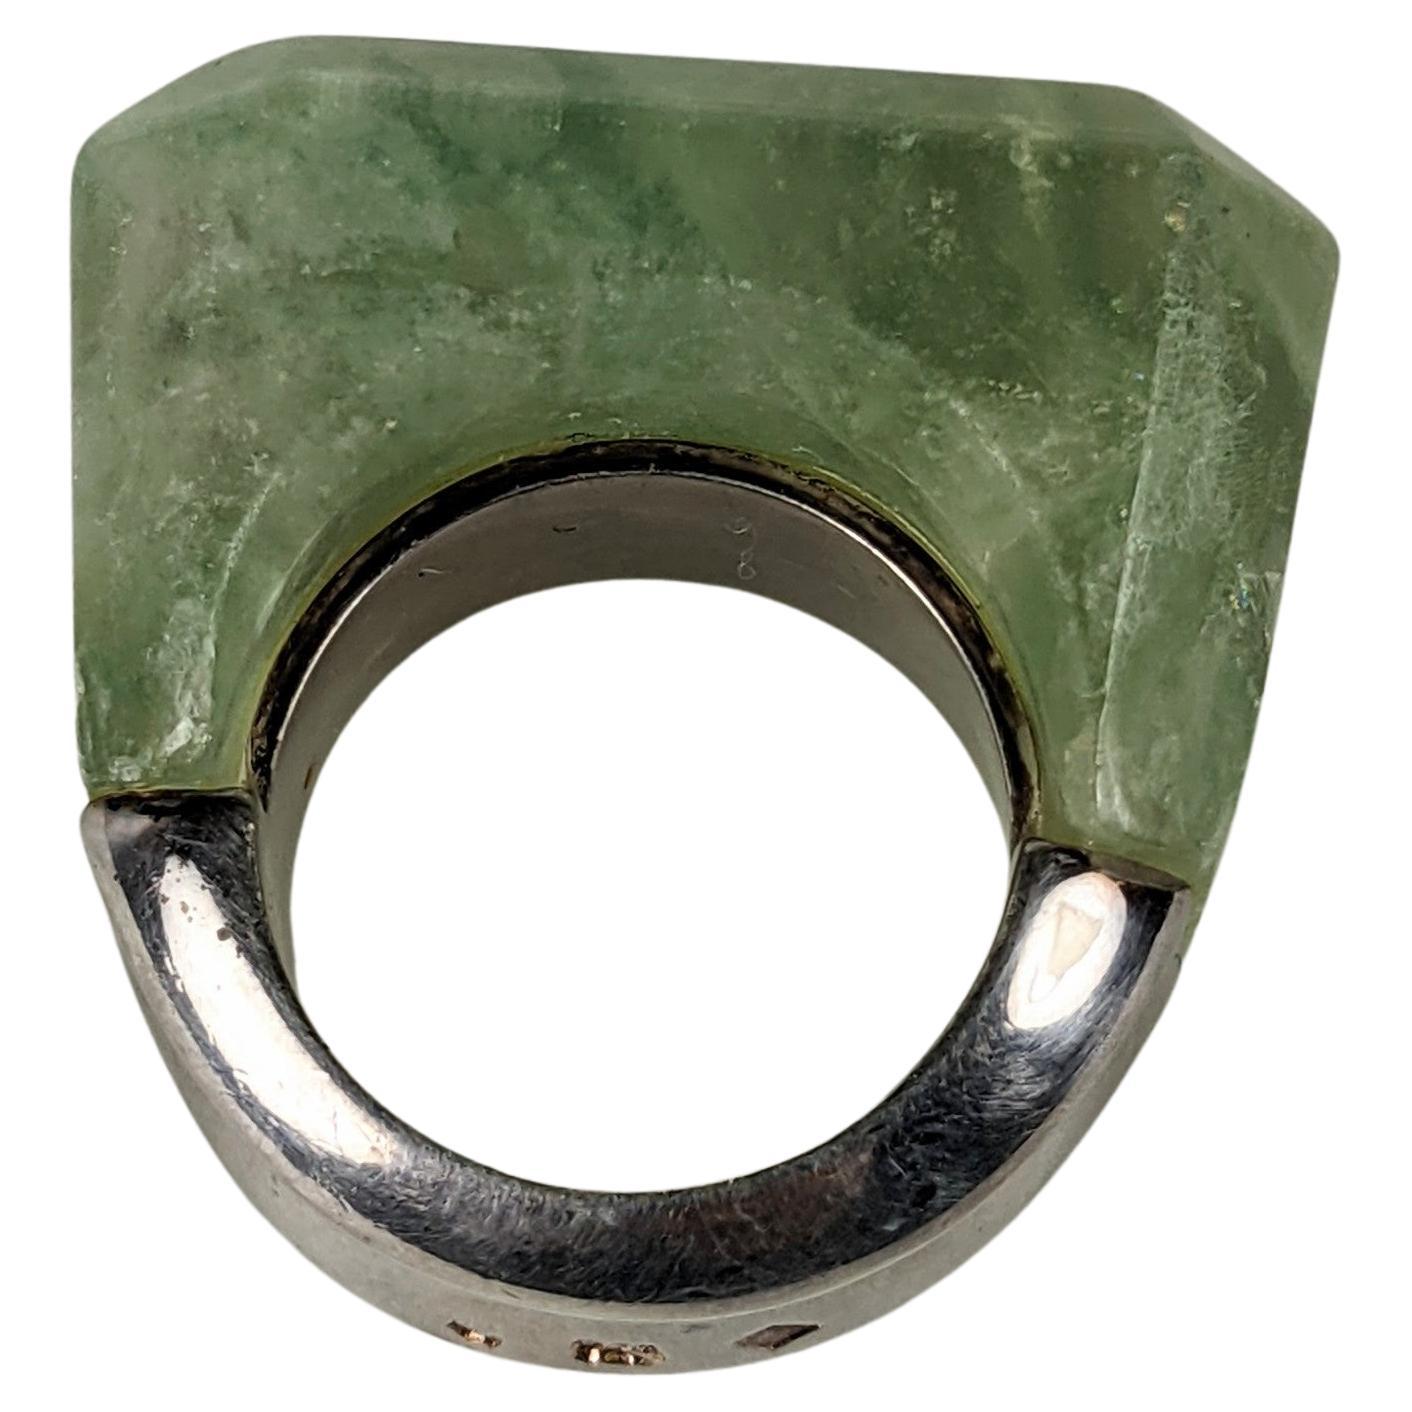 Rare and unusual ring made for Chanel Haute Couture runway presentation for Spring Summer  2000. A massive emerald cut fluorite is mounted into a large sterling silver shank very reminiscent of the work of jeweler Tina Chow.<br />
Made for Karl